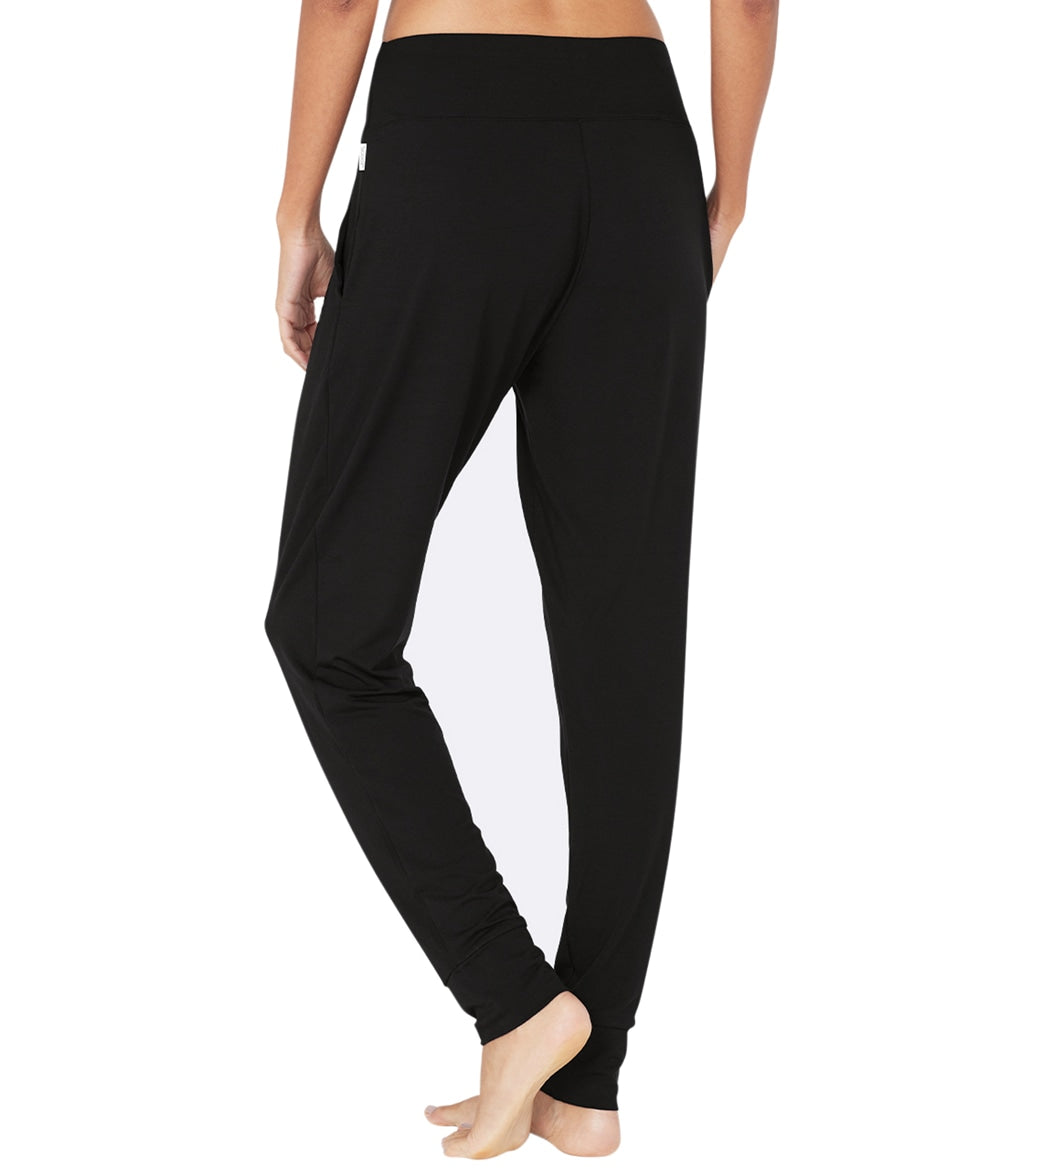 Boody - Our bestselling Downtime Lounge Pants are now available in Black!  Say hello to your brand new stay-at-home staple. #StayHome and  #FindYourDowntime in Boody Lounge 💕⁠ Shop Downtime Lounge Pants -->